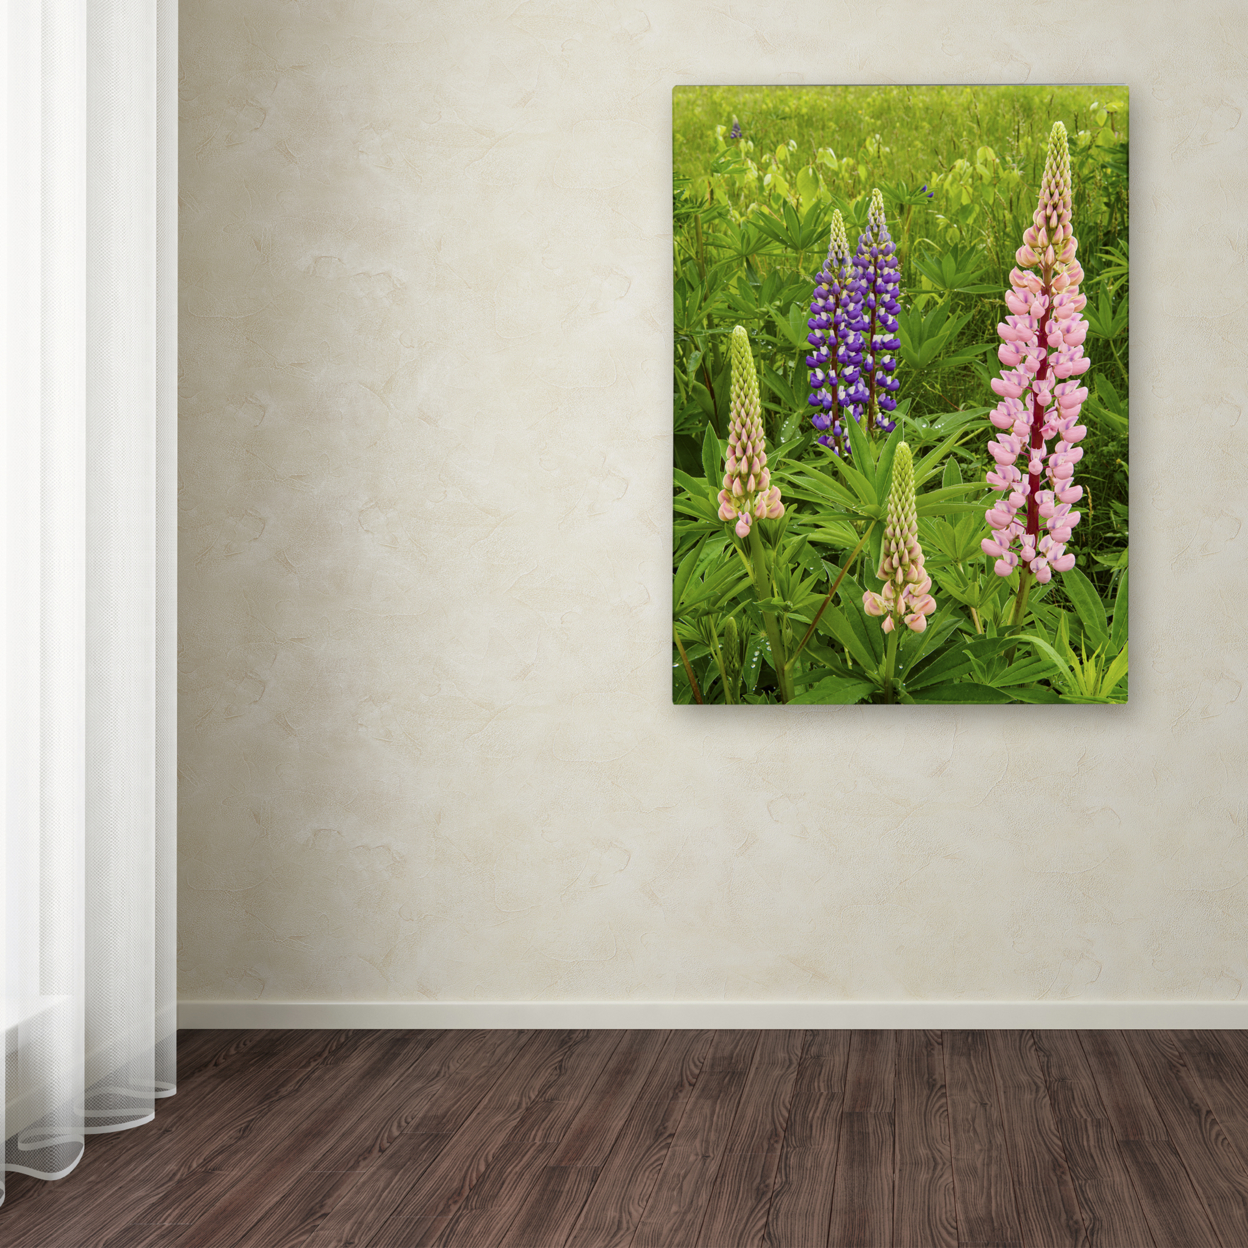 Michael Blanchette Photography 'Lupine Family' Canvas Wall Art 35 X 47 Inches